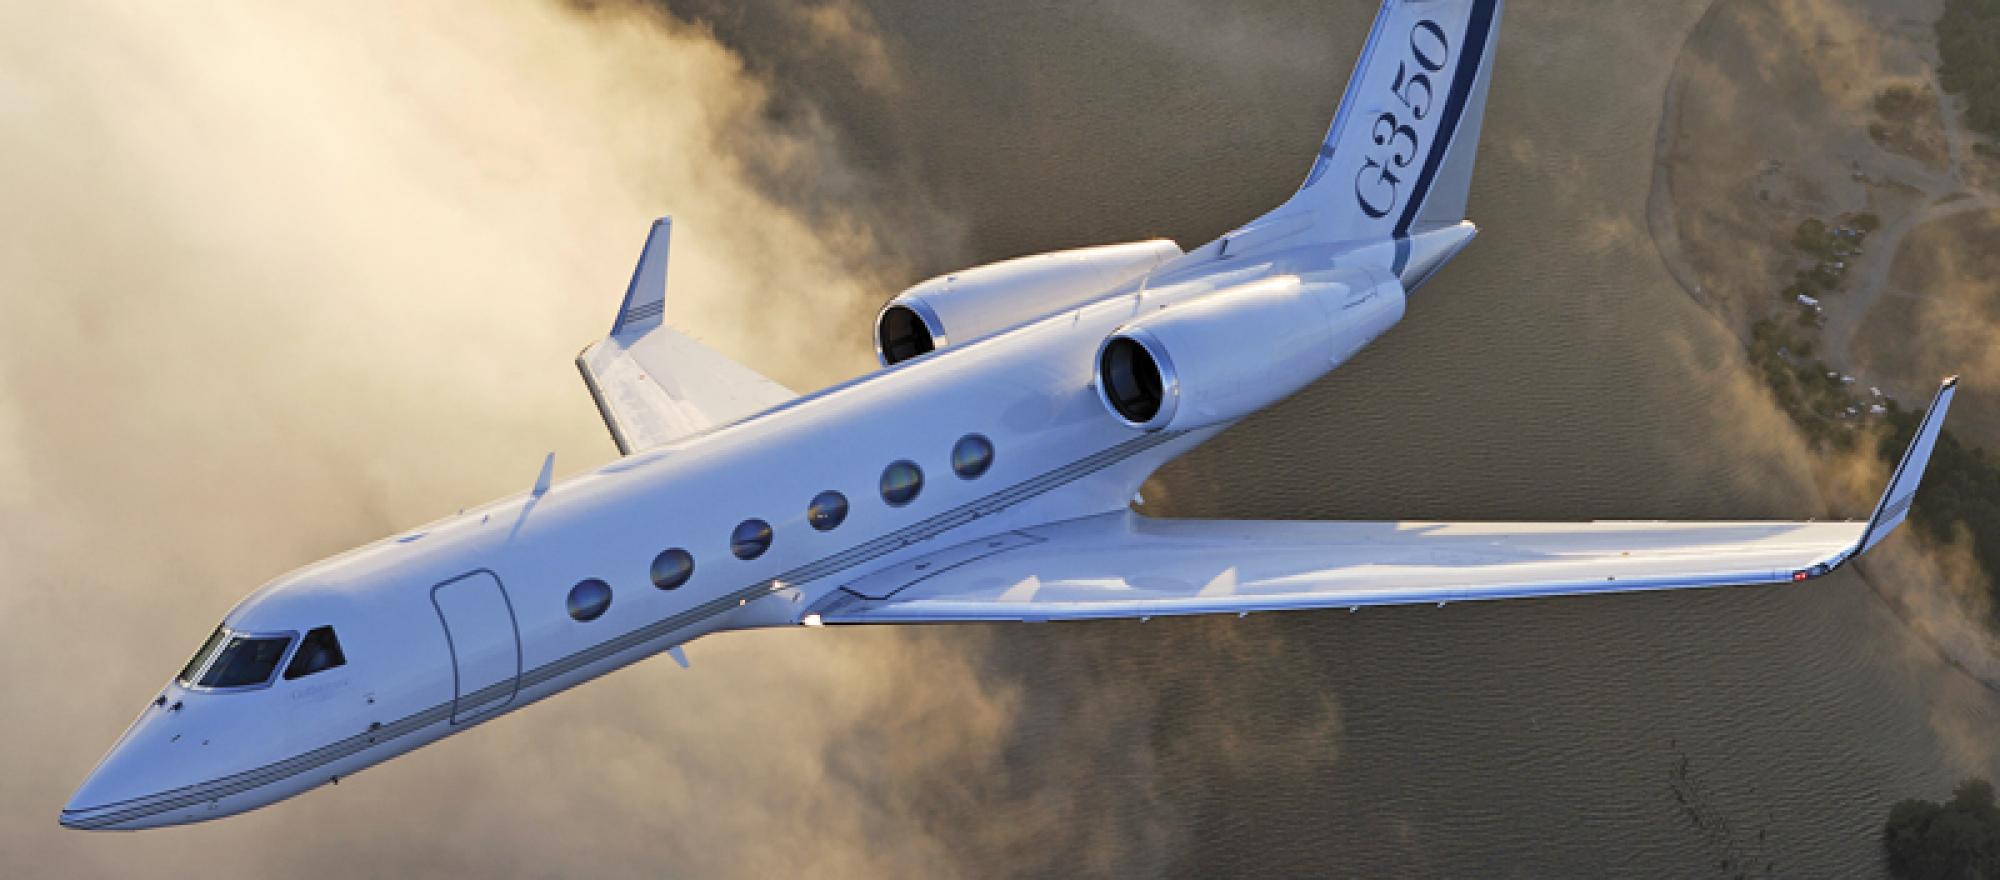 The G350 won’t get you to China on a single load of fuel, but if all you need